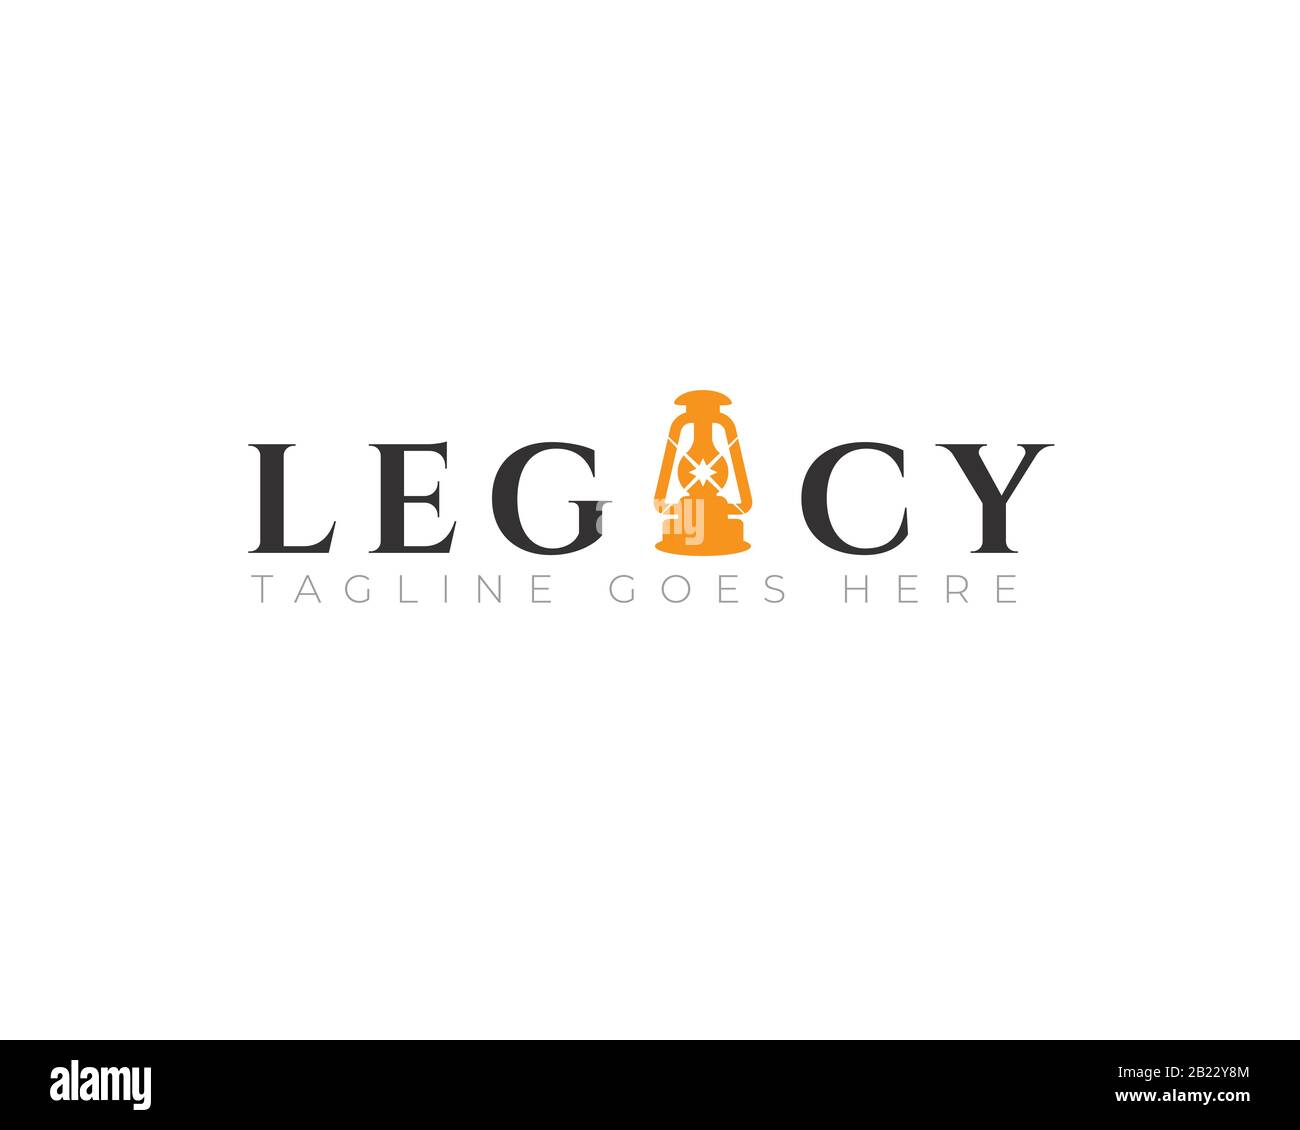 legacy wordmark with classic lantern as letter A Stock Vector